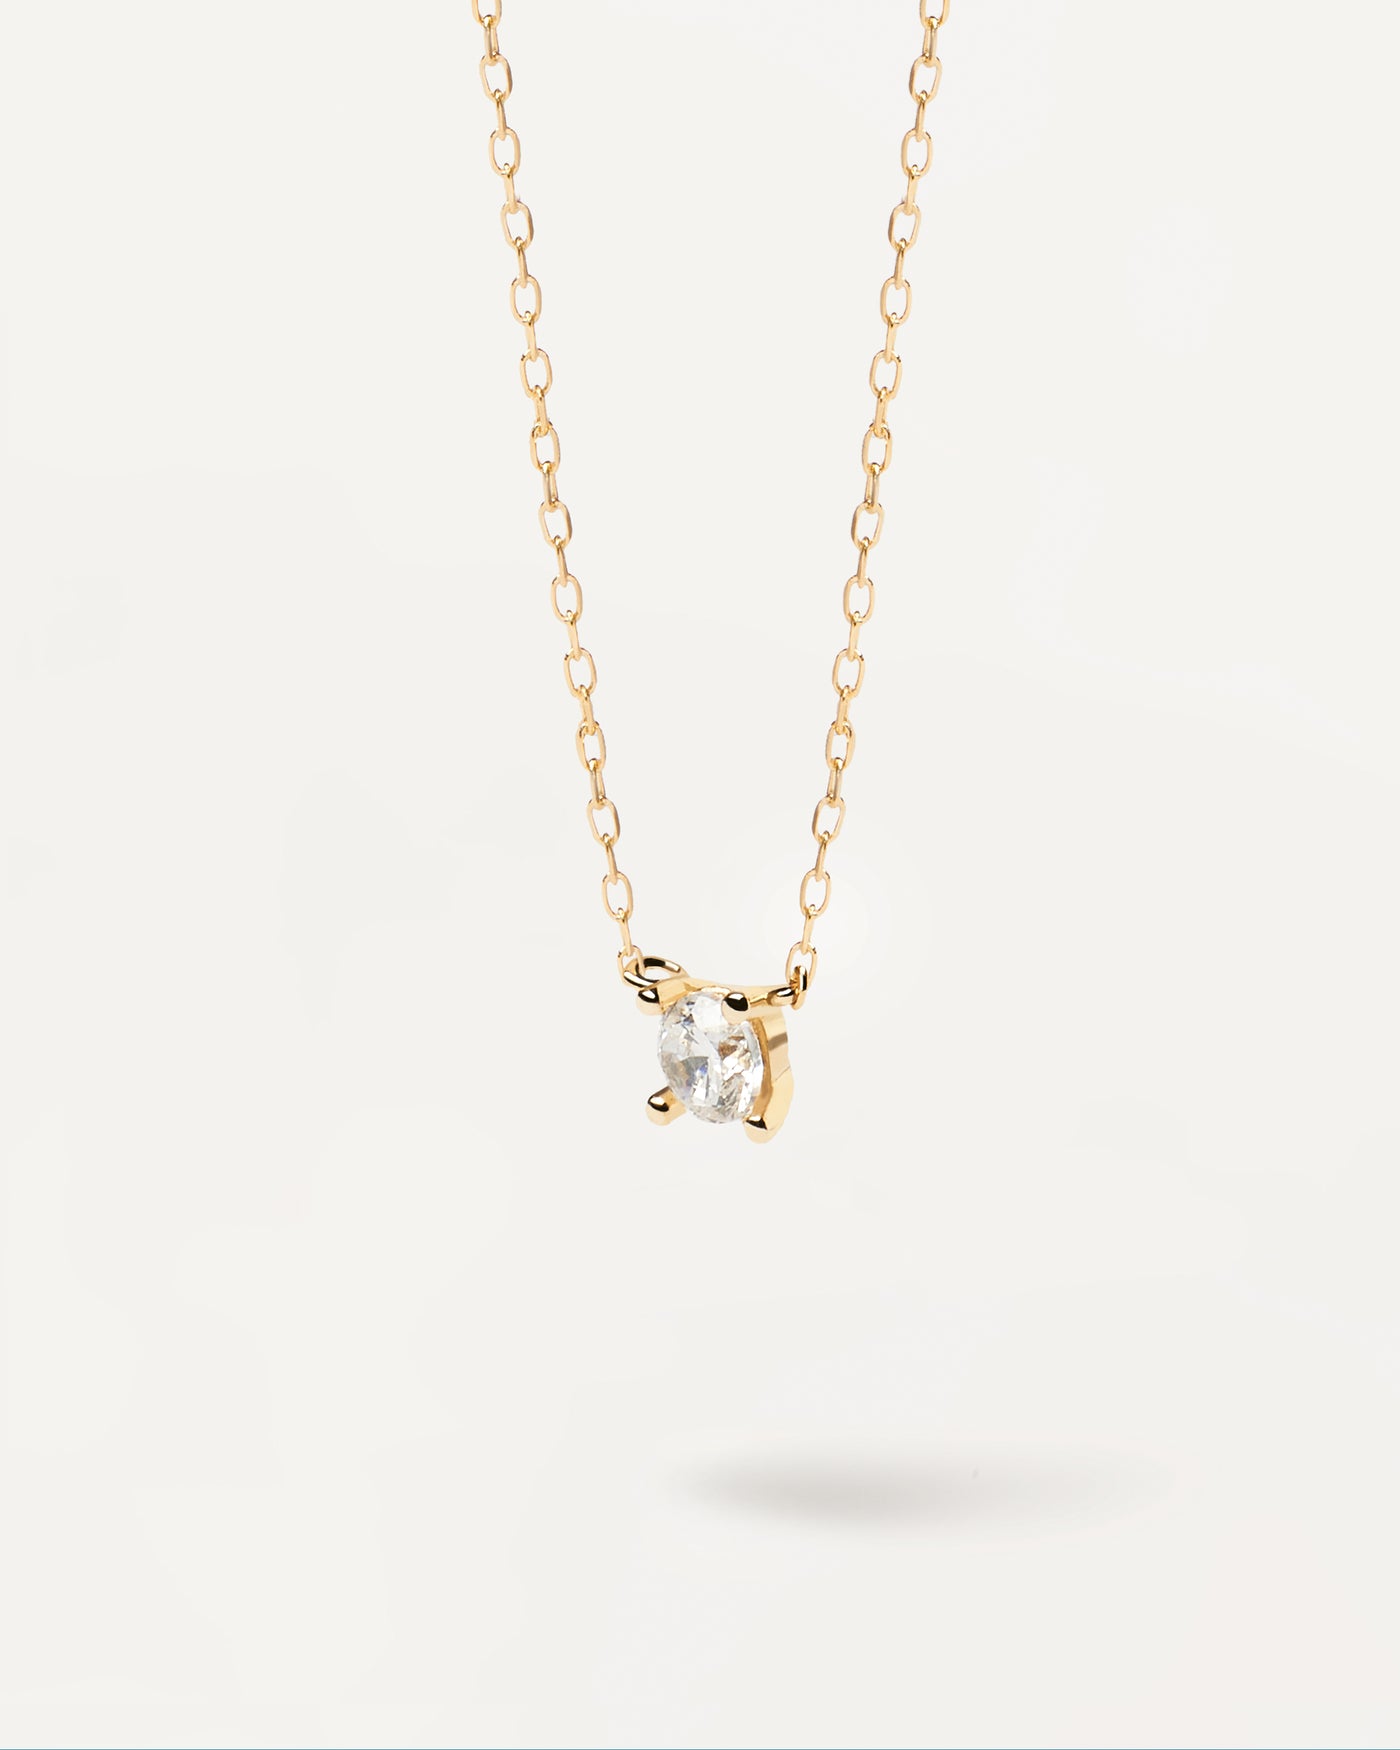 Diamonds and Yellow Gold Solitaire Mini Necklace - 18K solid yellow gold